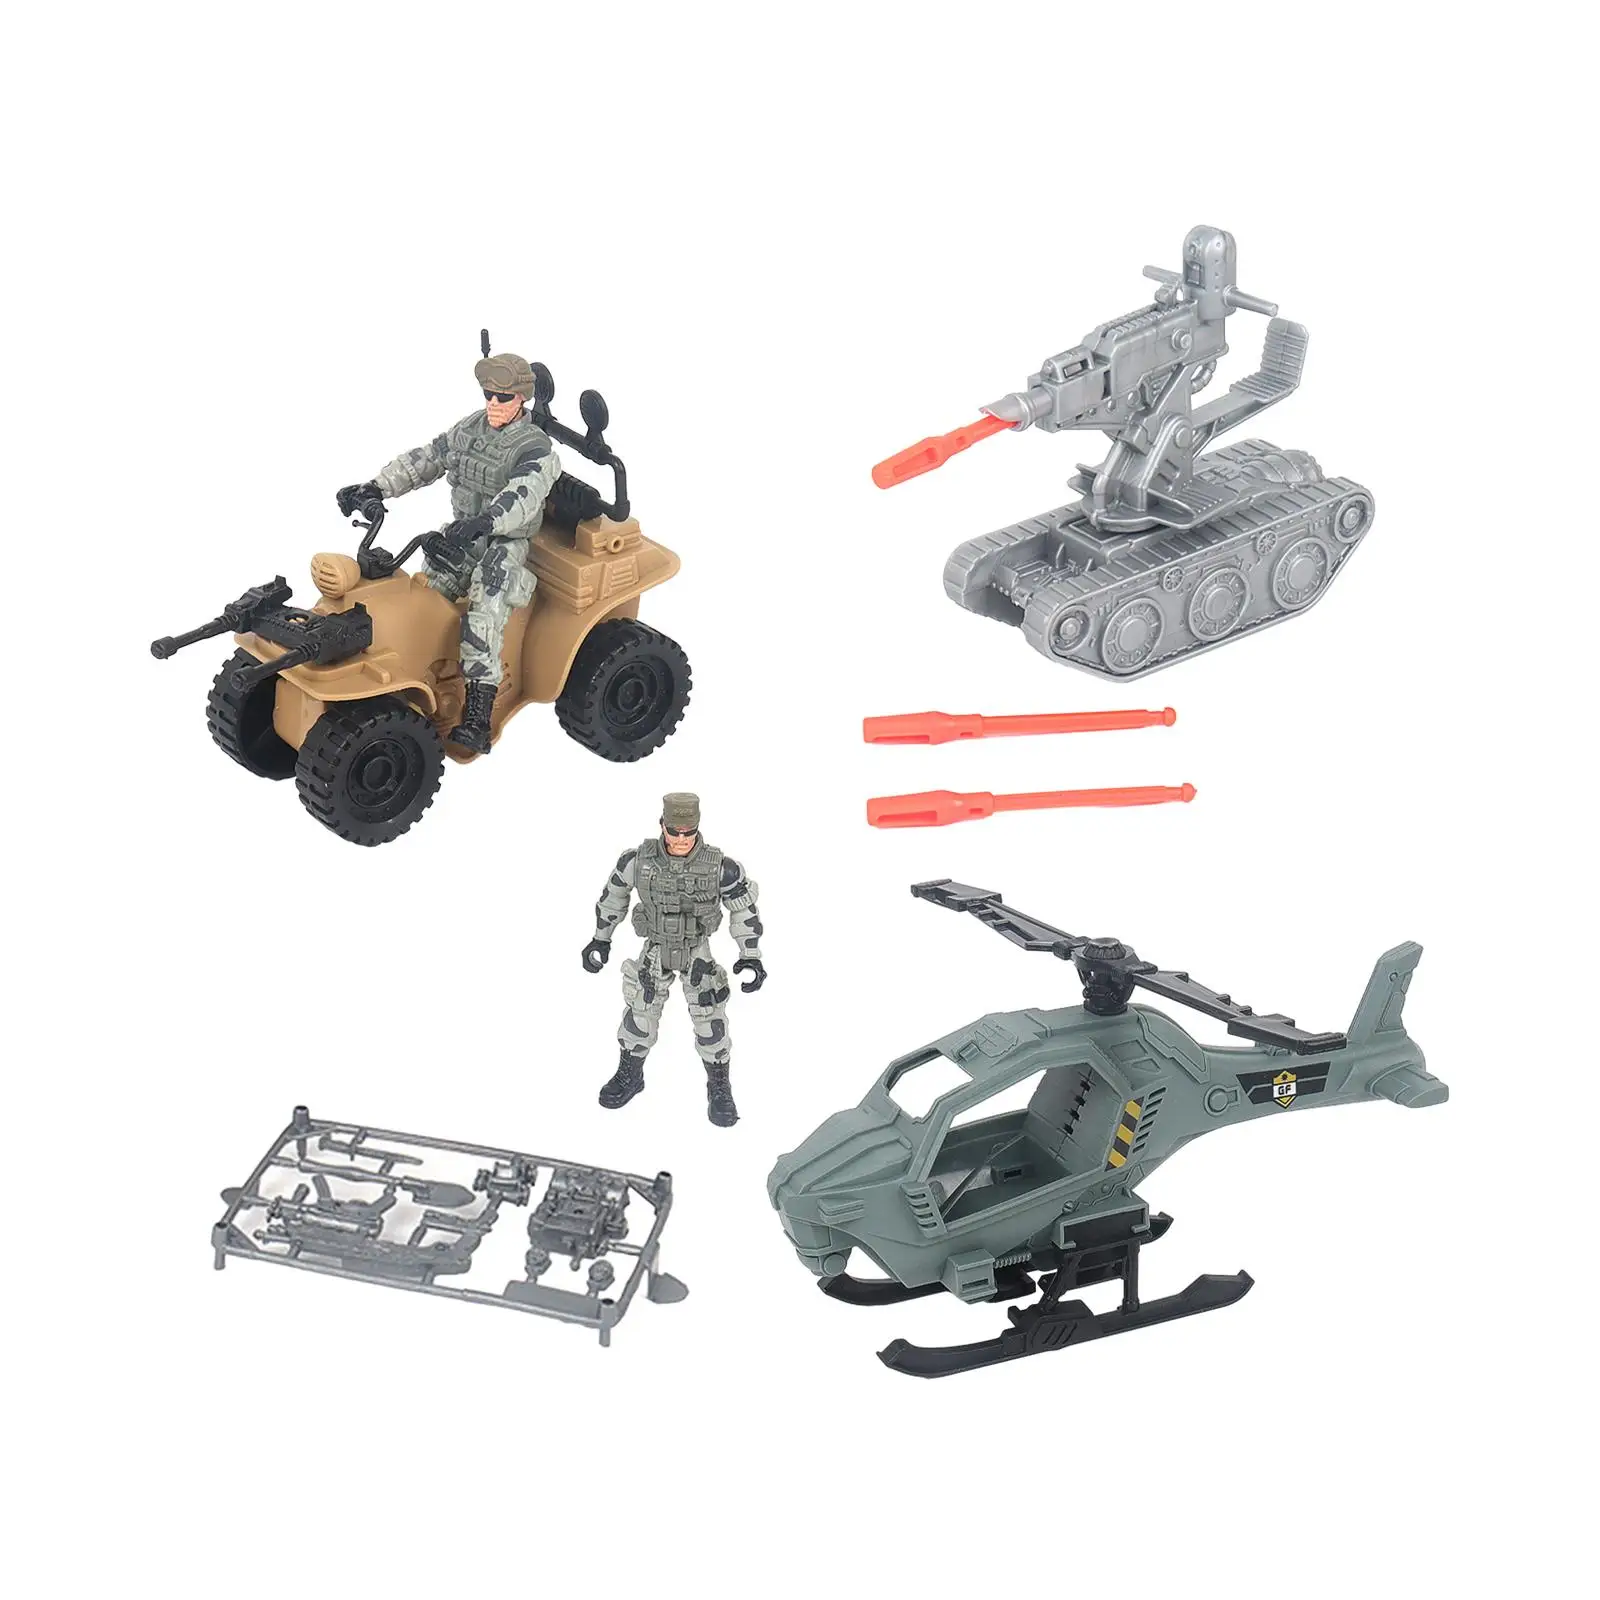 

Simulation Soldier Scene Decor Kits Include Soldier, Tank, Motorcycle, and Helicopter Desktop Decoration Diorama Vehicle Toy